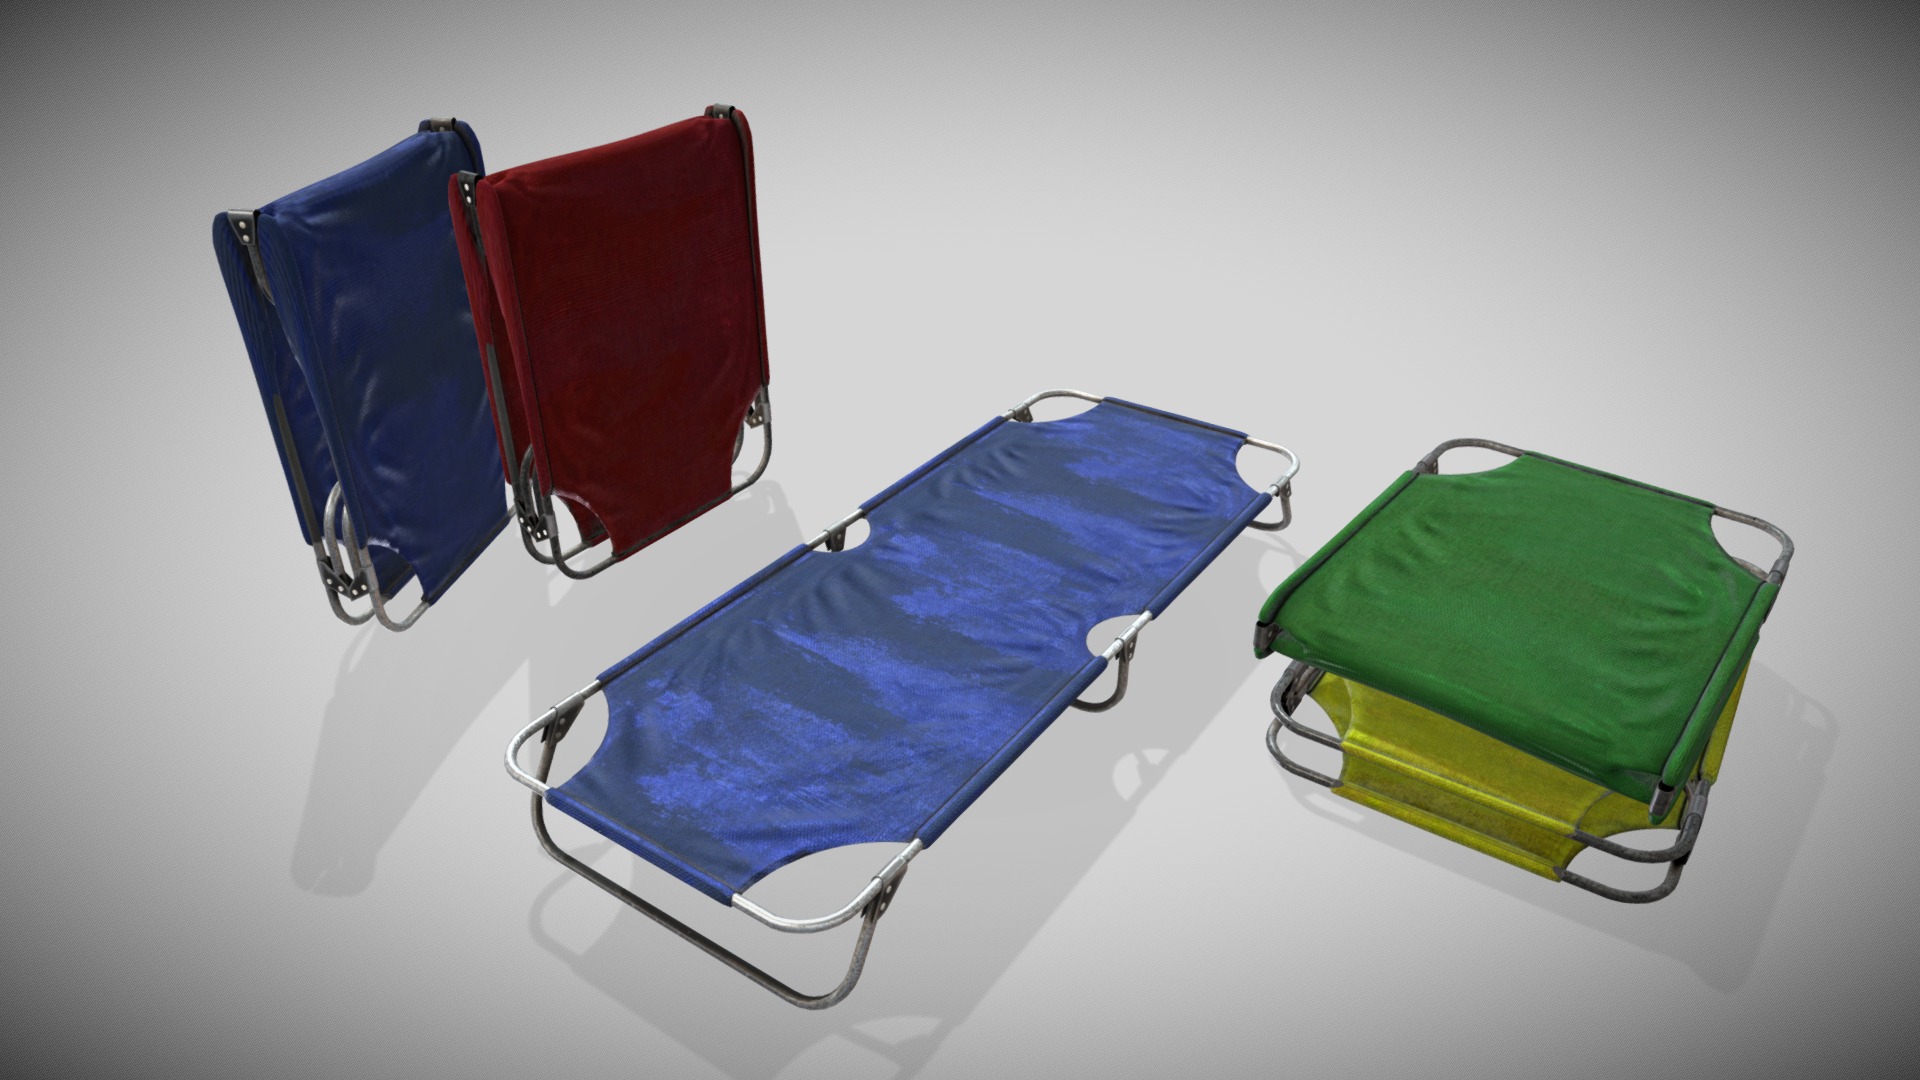 3D model Lettino Campeggio - This is a 3D model of the Lettino Campeggio. The 3D model is about a group of different colored bags.